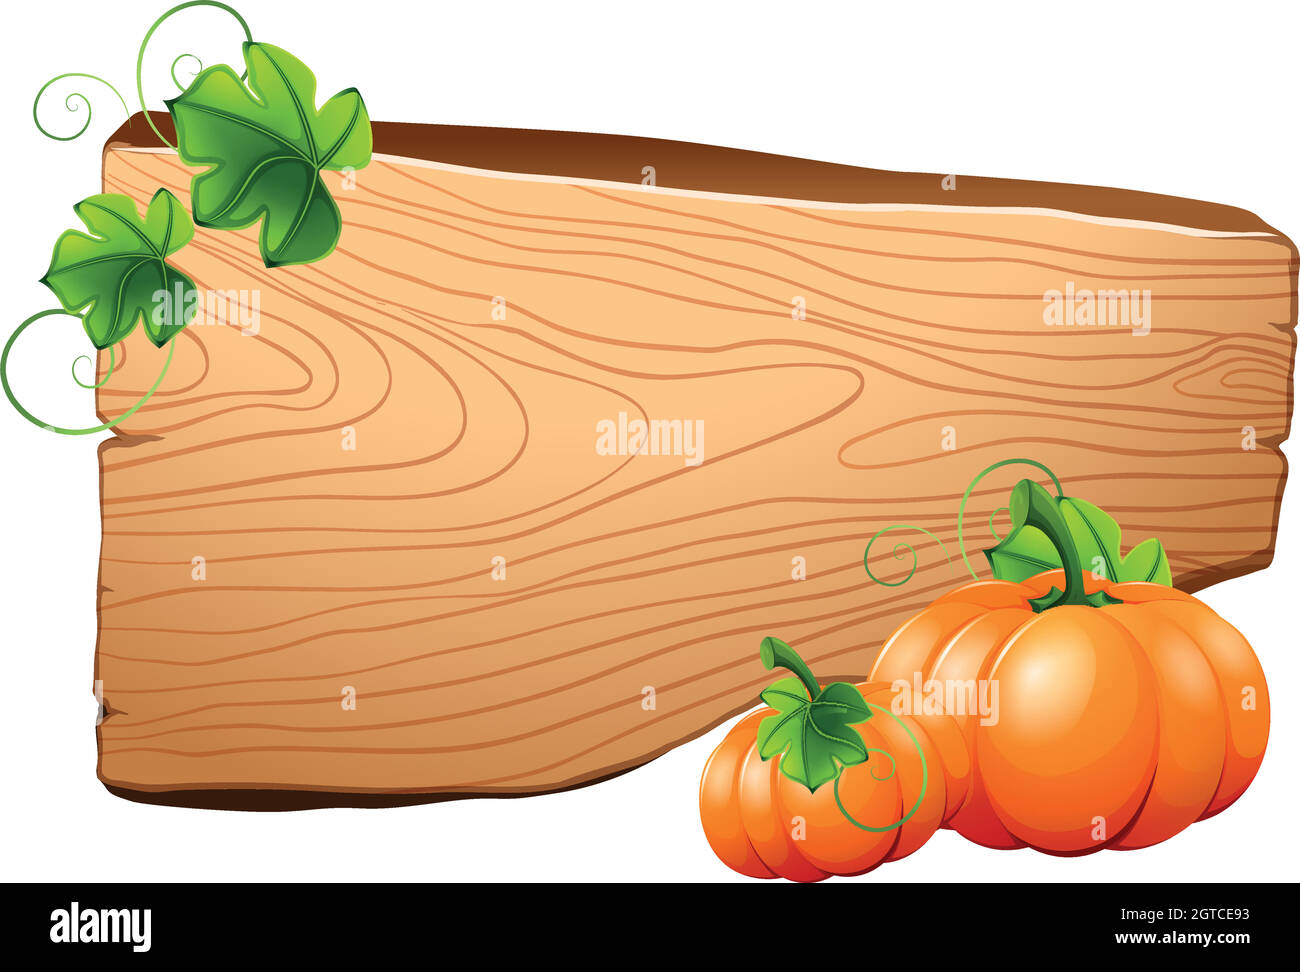 Wooden board and pumpkins on vine Stock Vector